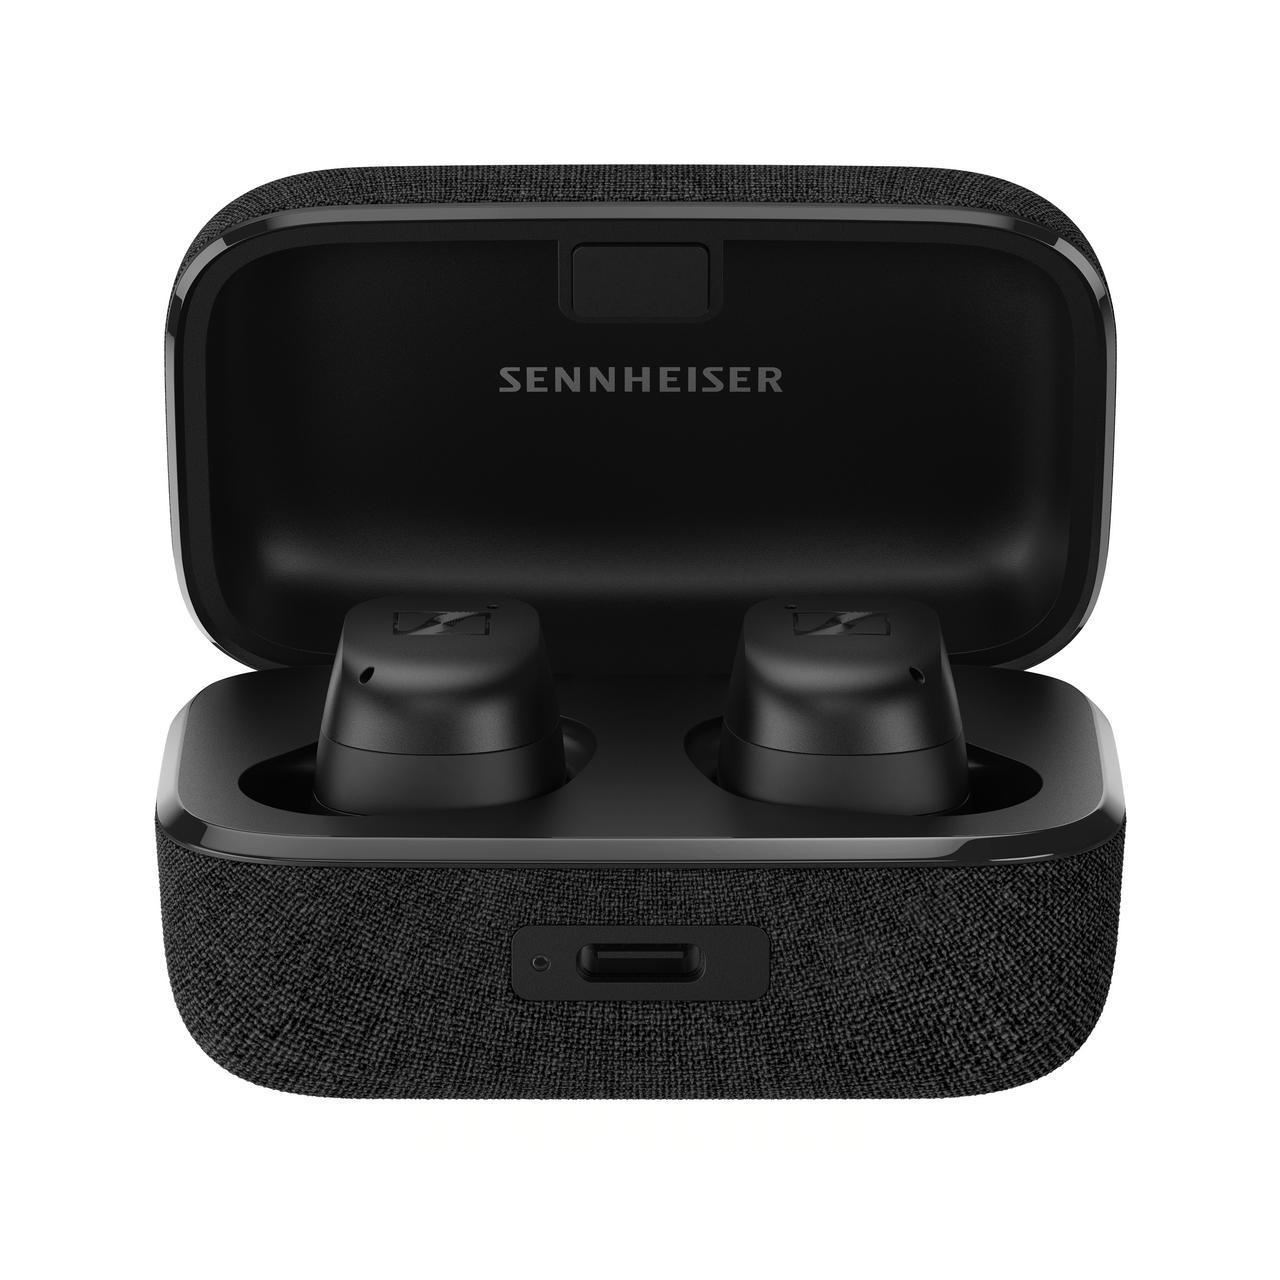 Sennheiser MOMENTUM True Wireless 3 Earbuds -Bluetooth In-Ear Headphones for Music and Calls with ANC, Multipoint connectivity , IPX4, Qi charging, 28-hour Battery Life Compact Design - Black - image 1 of 5